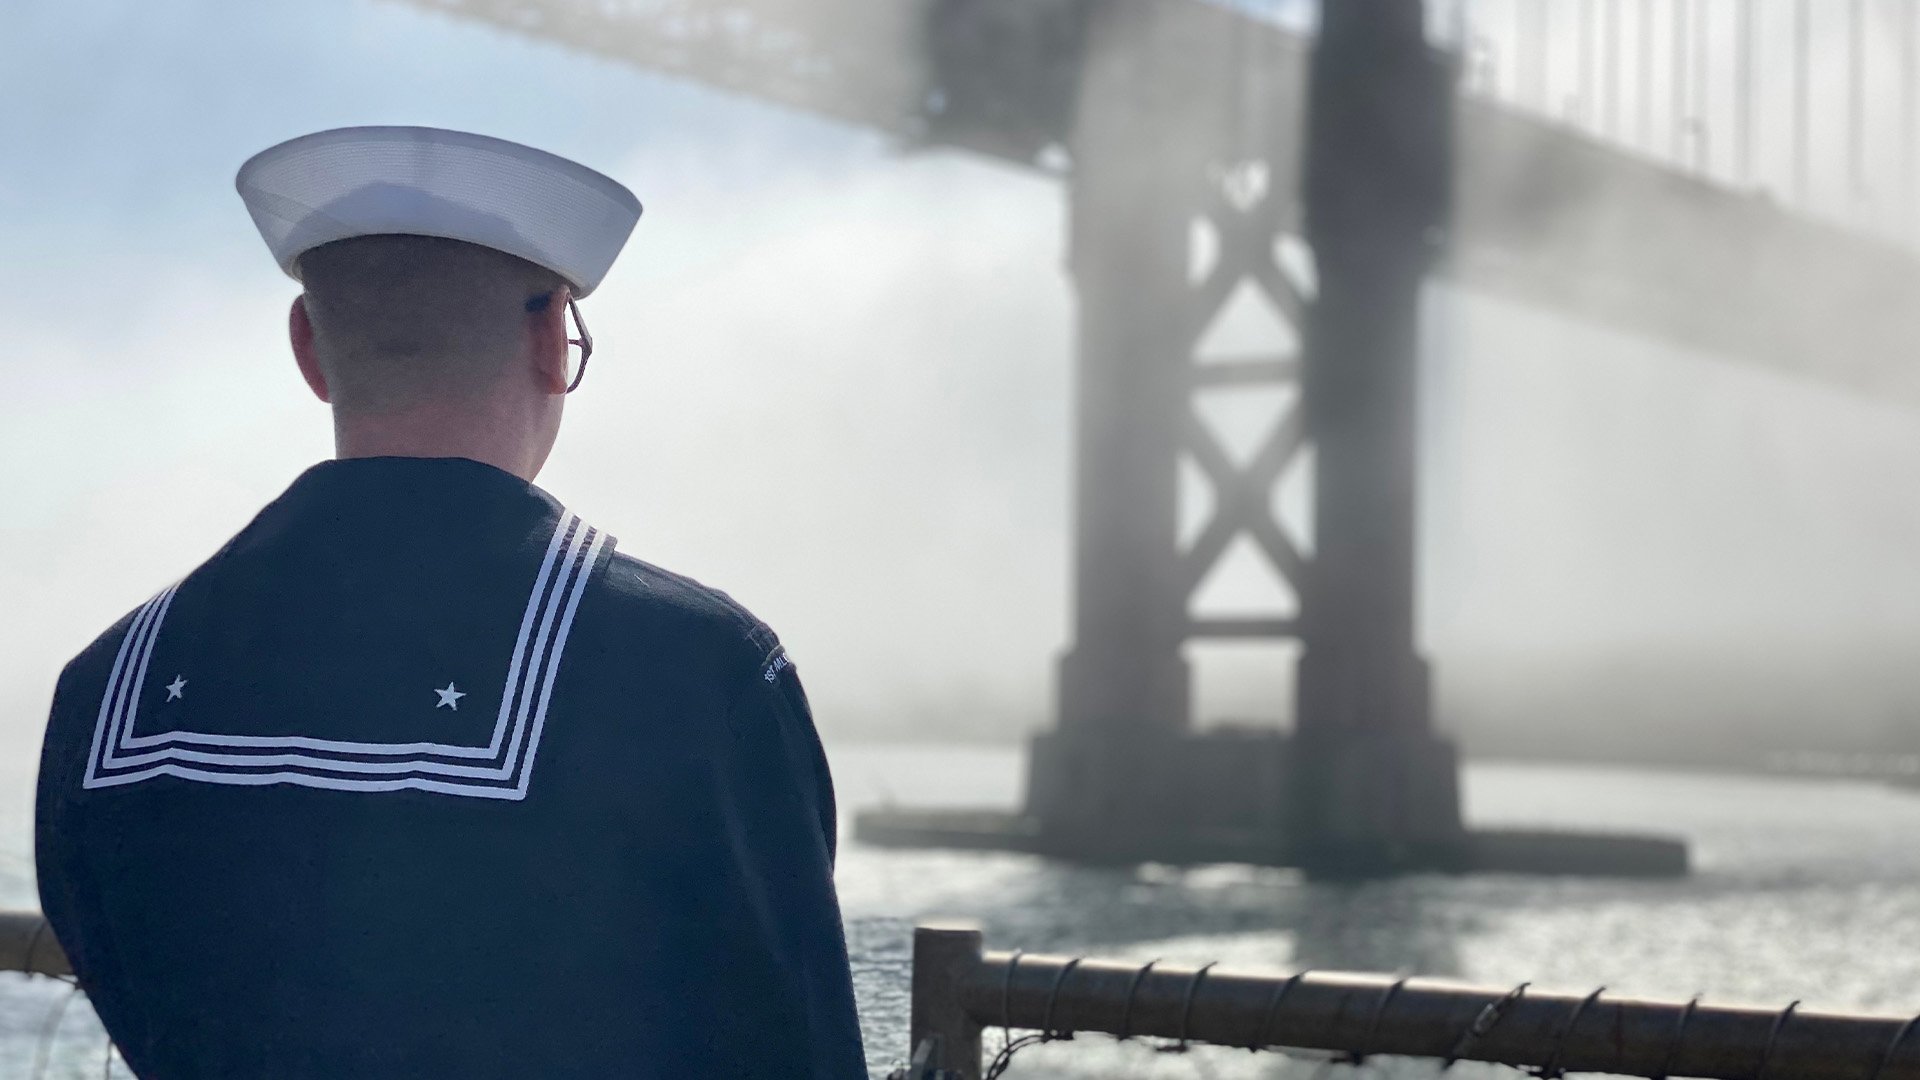 Launched four years ago, the US Navy Community College offers Marines, Coast Guardsmen and sailors, like those manning the rails on board the amphibious dock landing ship Harpers Ferry on Oct. 7, 2022, in San Francisco. US Navy photo by Mass Communication Specialist 1st Class Margie Vinson.